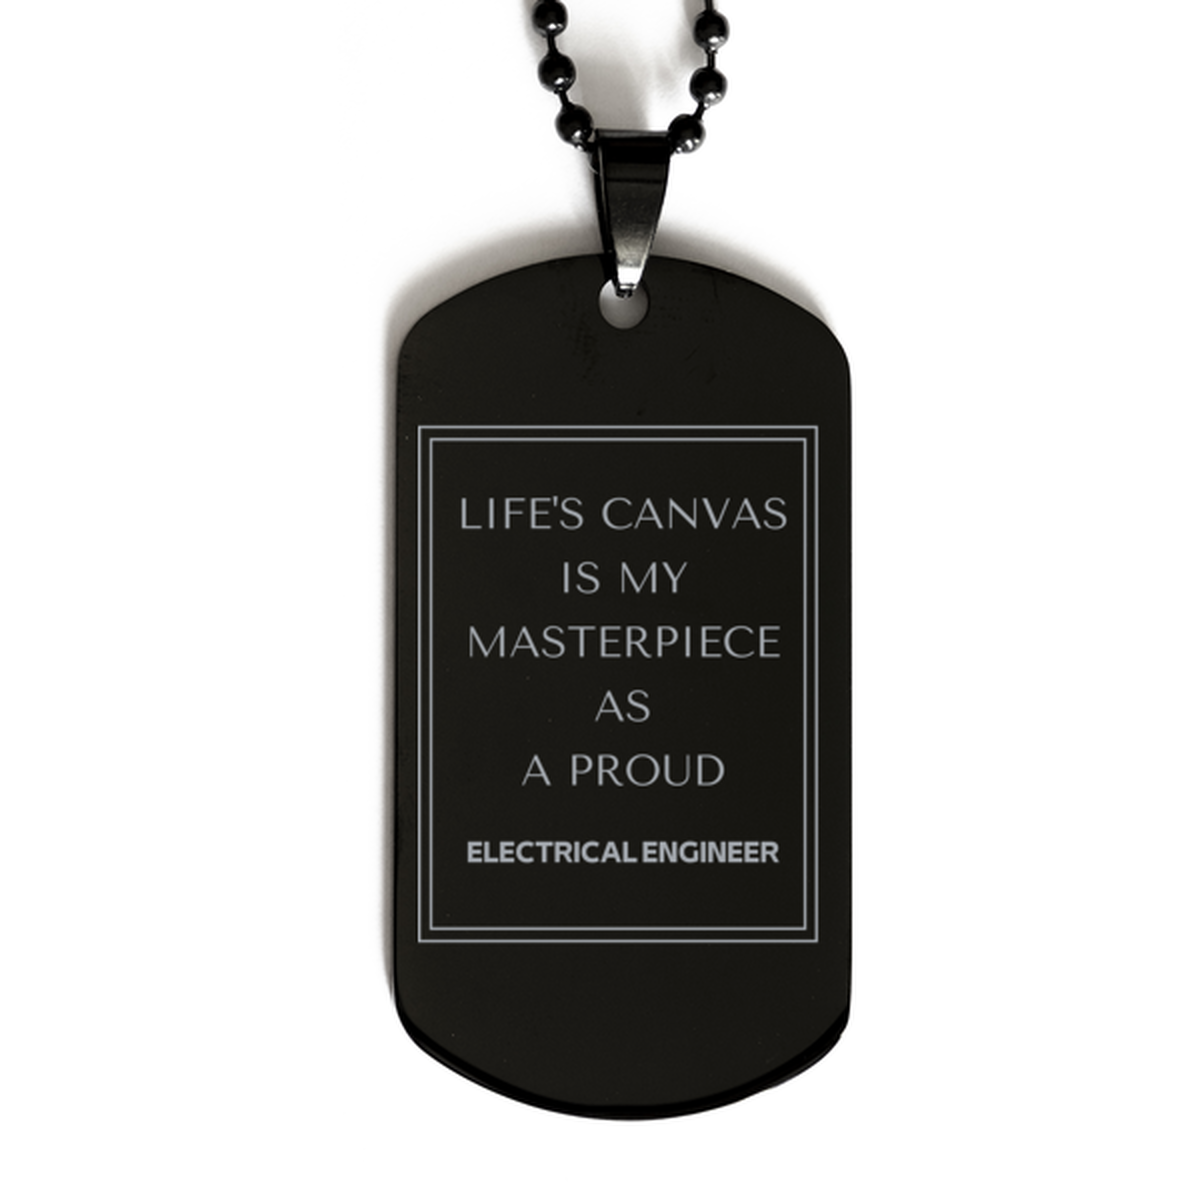 Proud Electrical Engineer Gifts, Life's canvas is my masterpiece, Epic Birthday Christmas Unique Black Dog Tag For Electrical Engineer, Coworkers, Men, Women, Friends